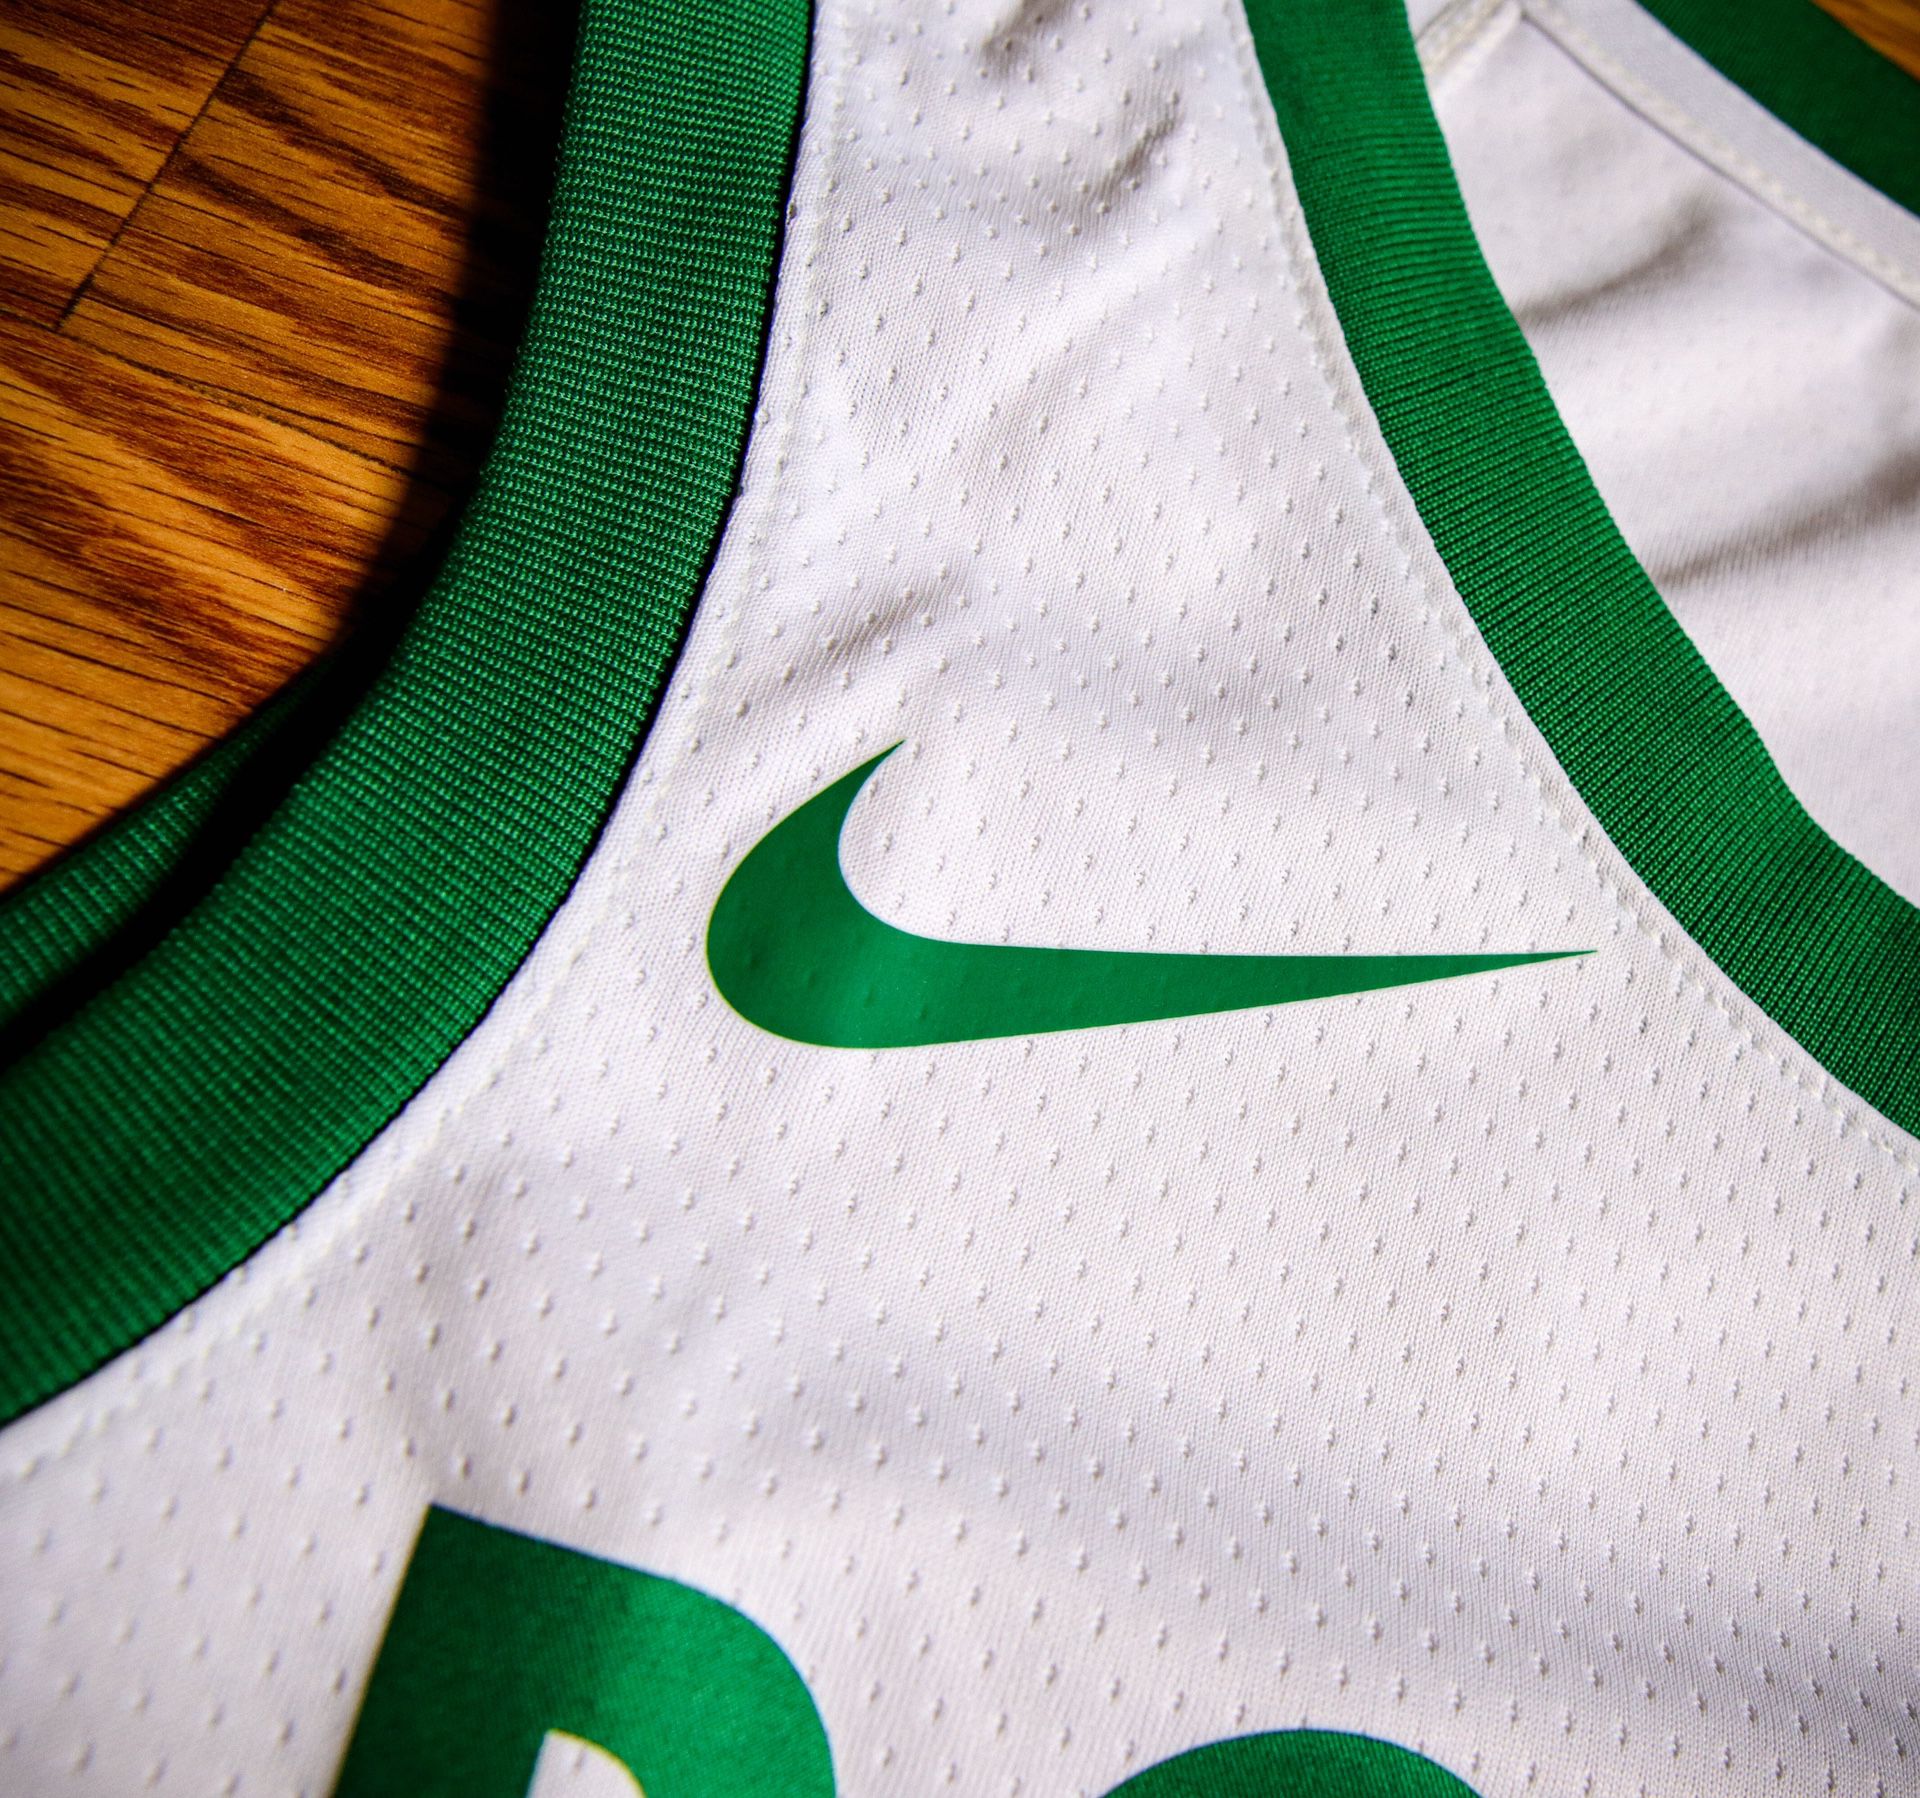 Nike Boston Celtics Kyrie Irving #11 Jersey $50 for Sale in Charlotte, NC -  OfferUp